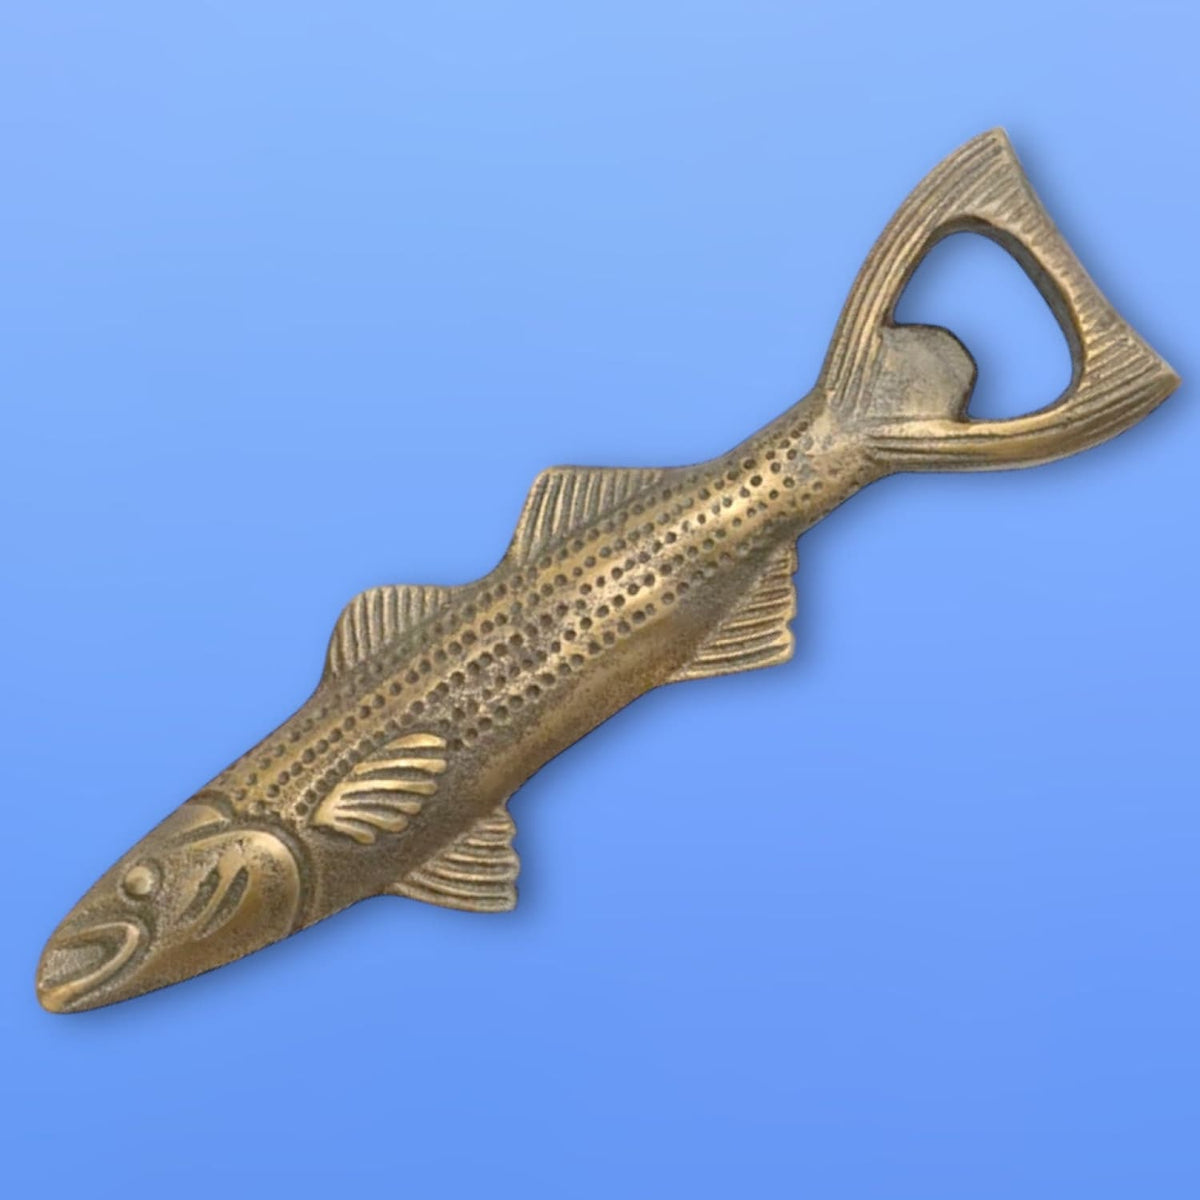 Fish Bottle Opener Df6832 Kitchen And Drink - Web0324